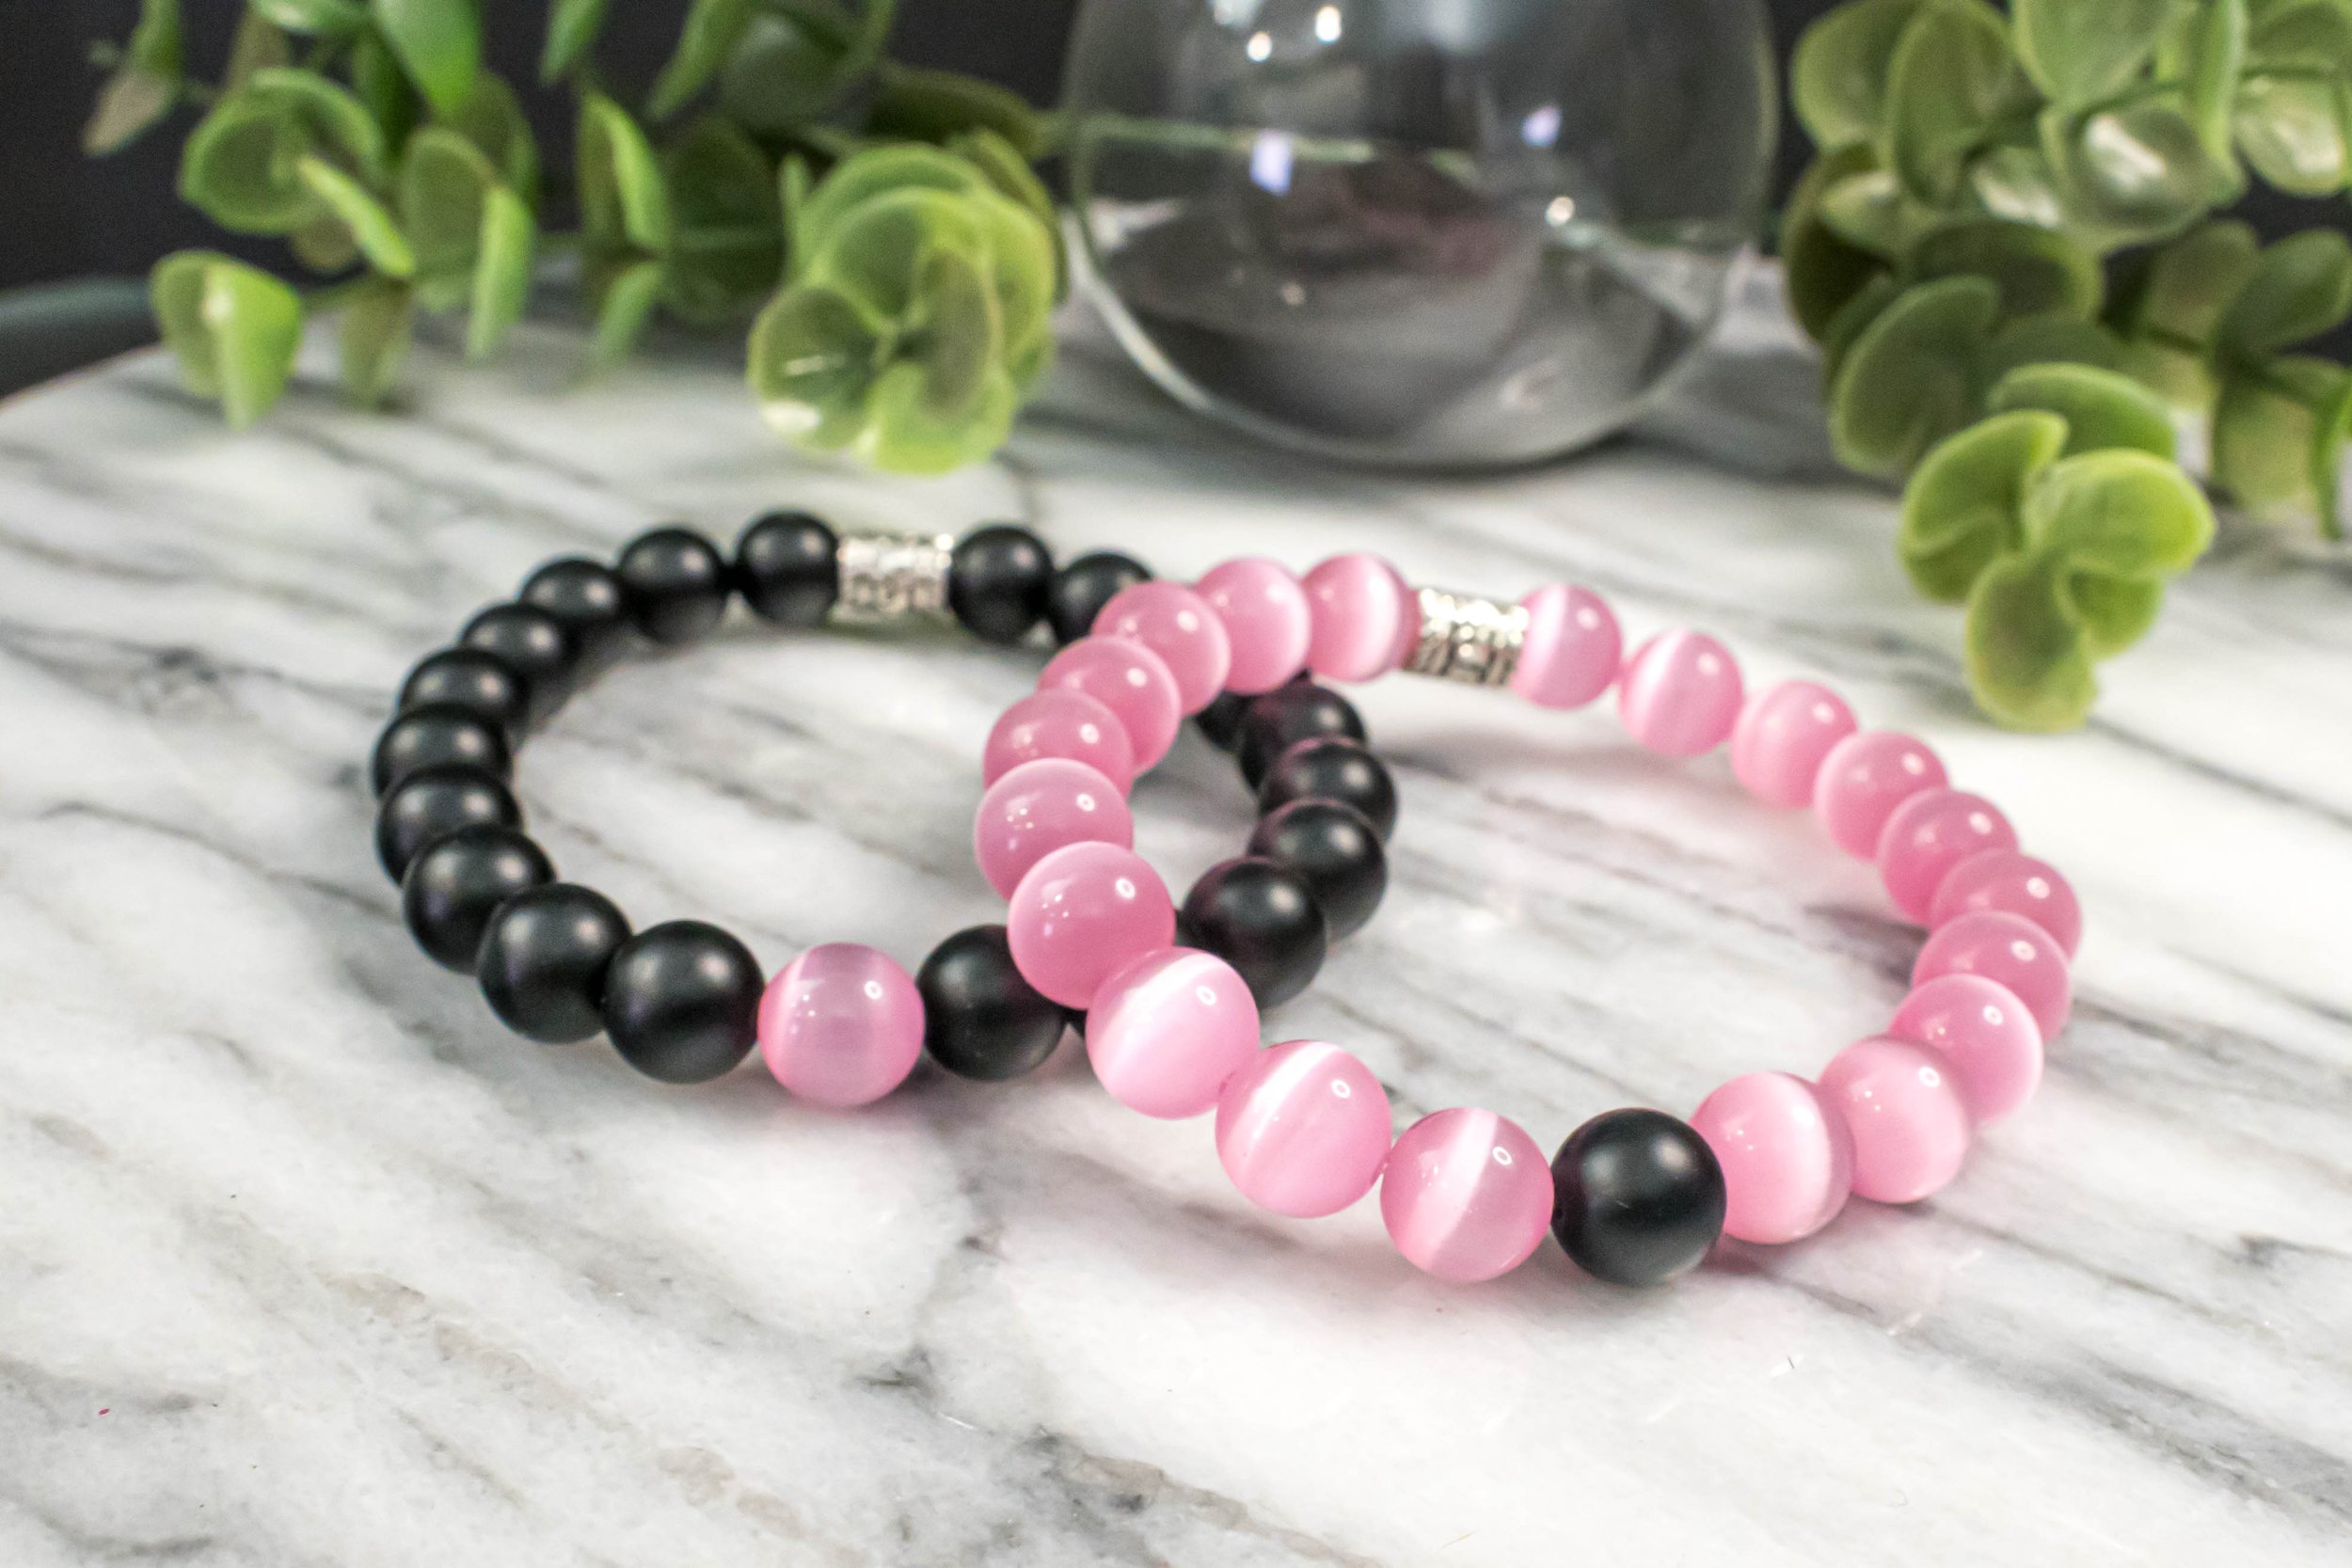 Fayuo Long Distance Bracelets set of 2 - Lovers are closer India | Ubuy